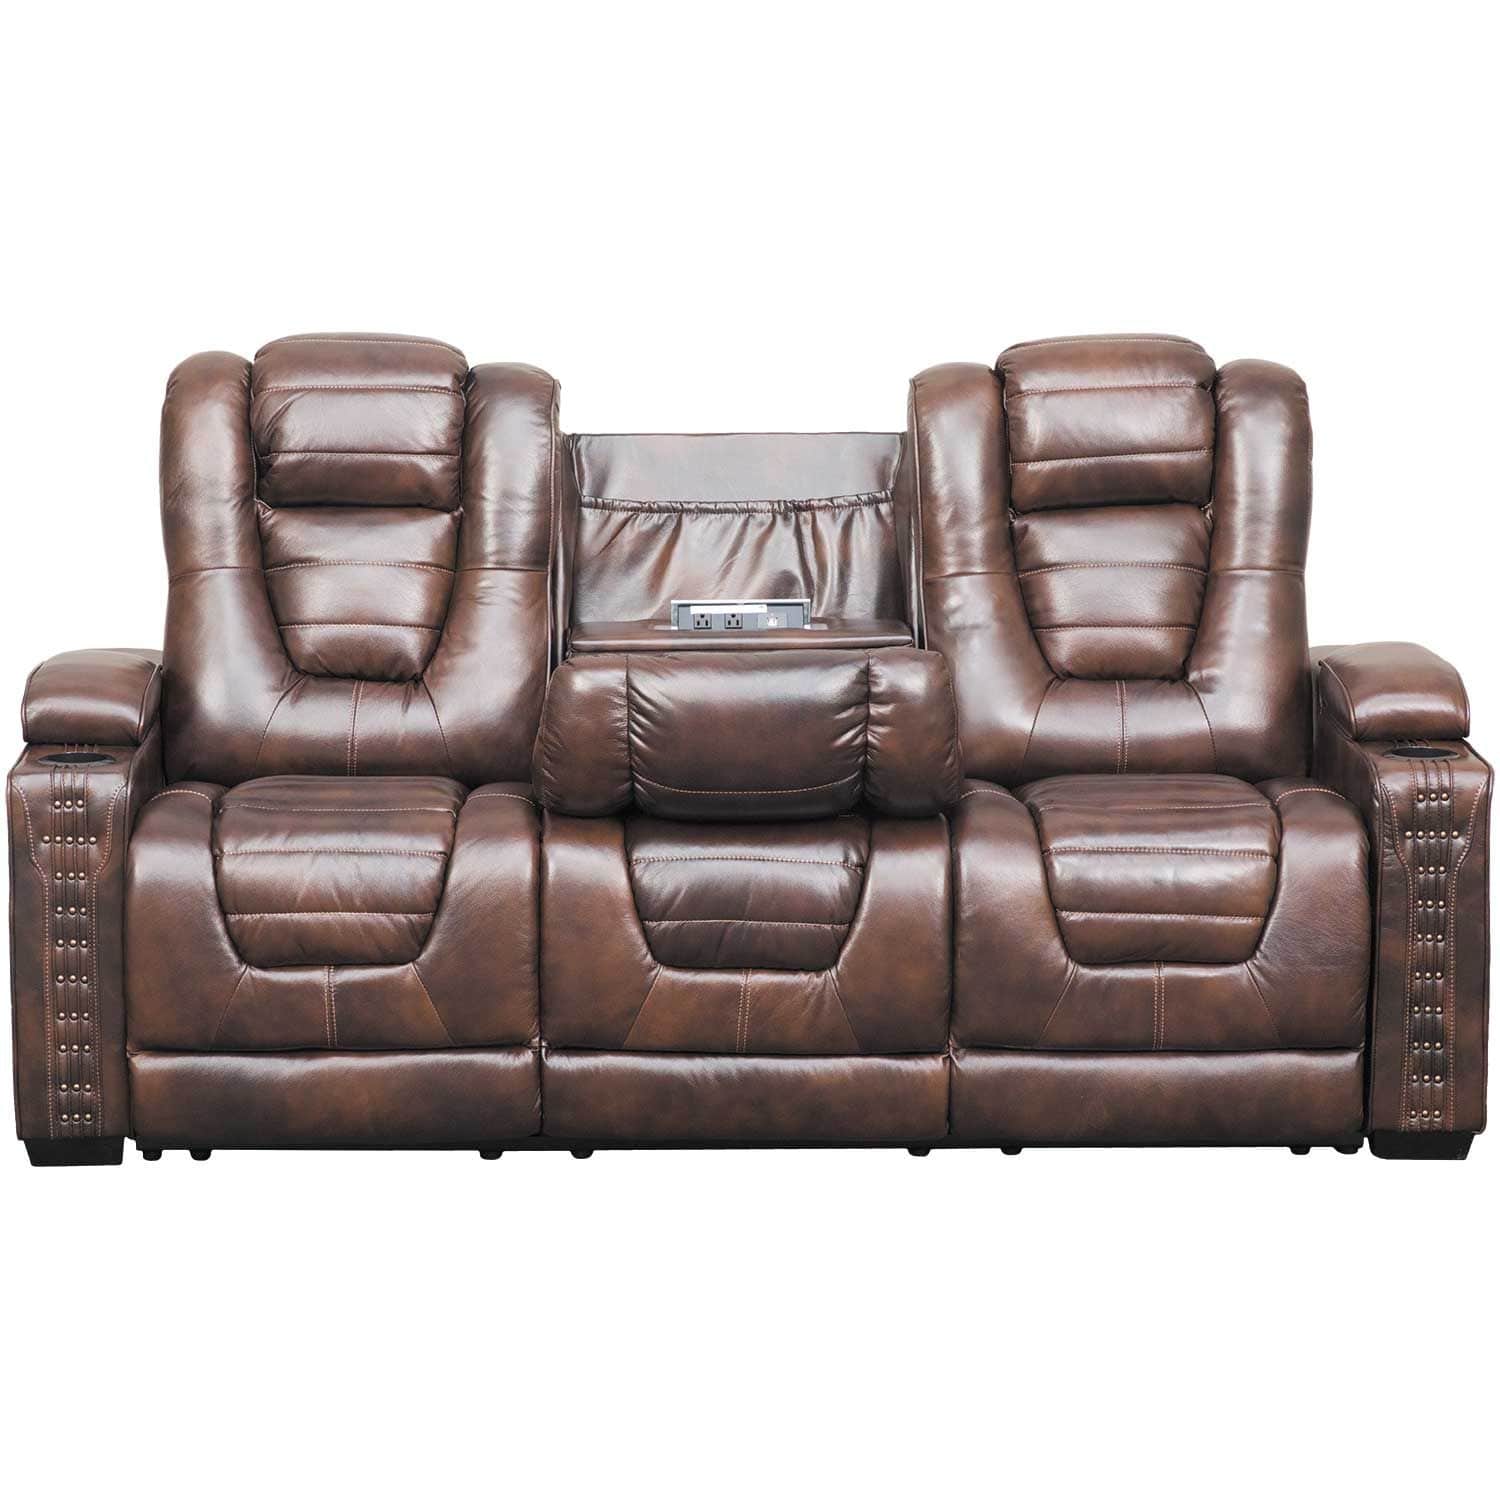 Big Chief Power Reclining Sofa w/ Drop Table and Adjustable Headrest